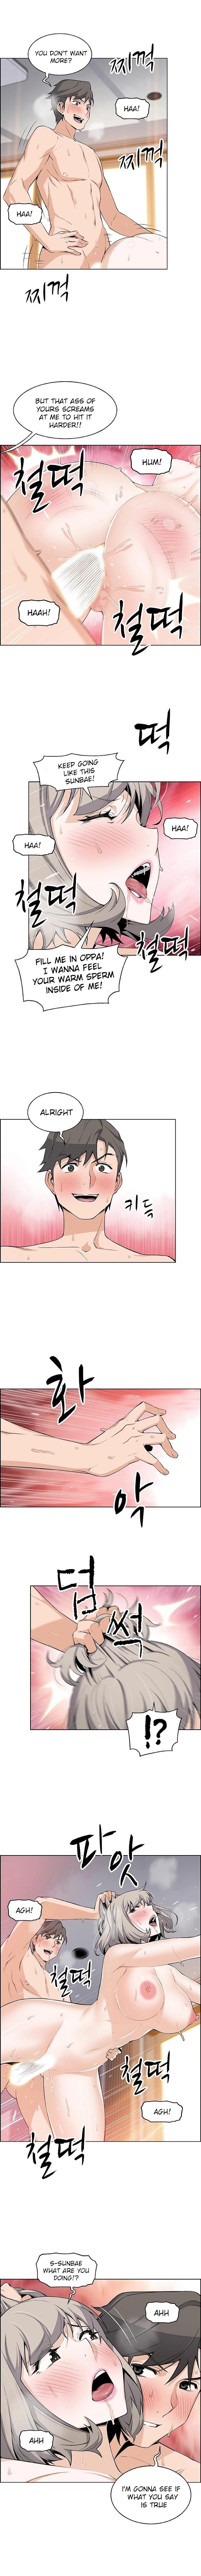 Housekeeper [Neck Pillow, Paper] Ch.49/49 [English] [Manhwa PDF] Completed 196